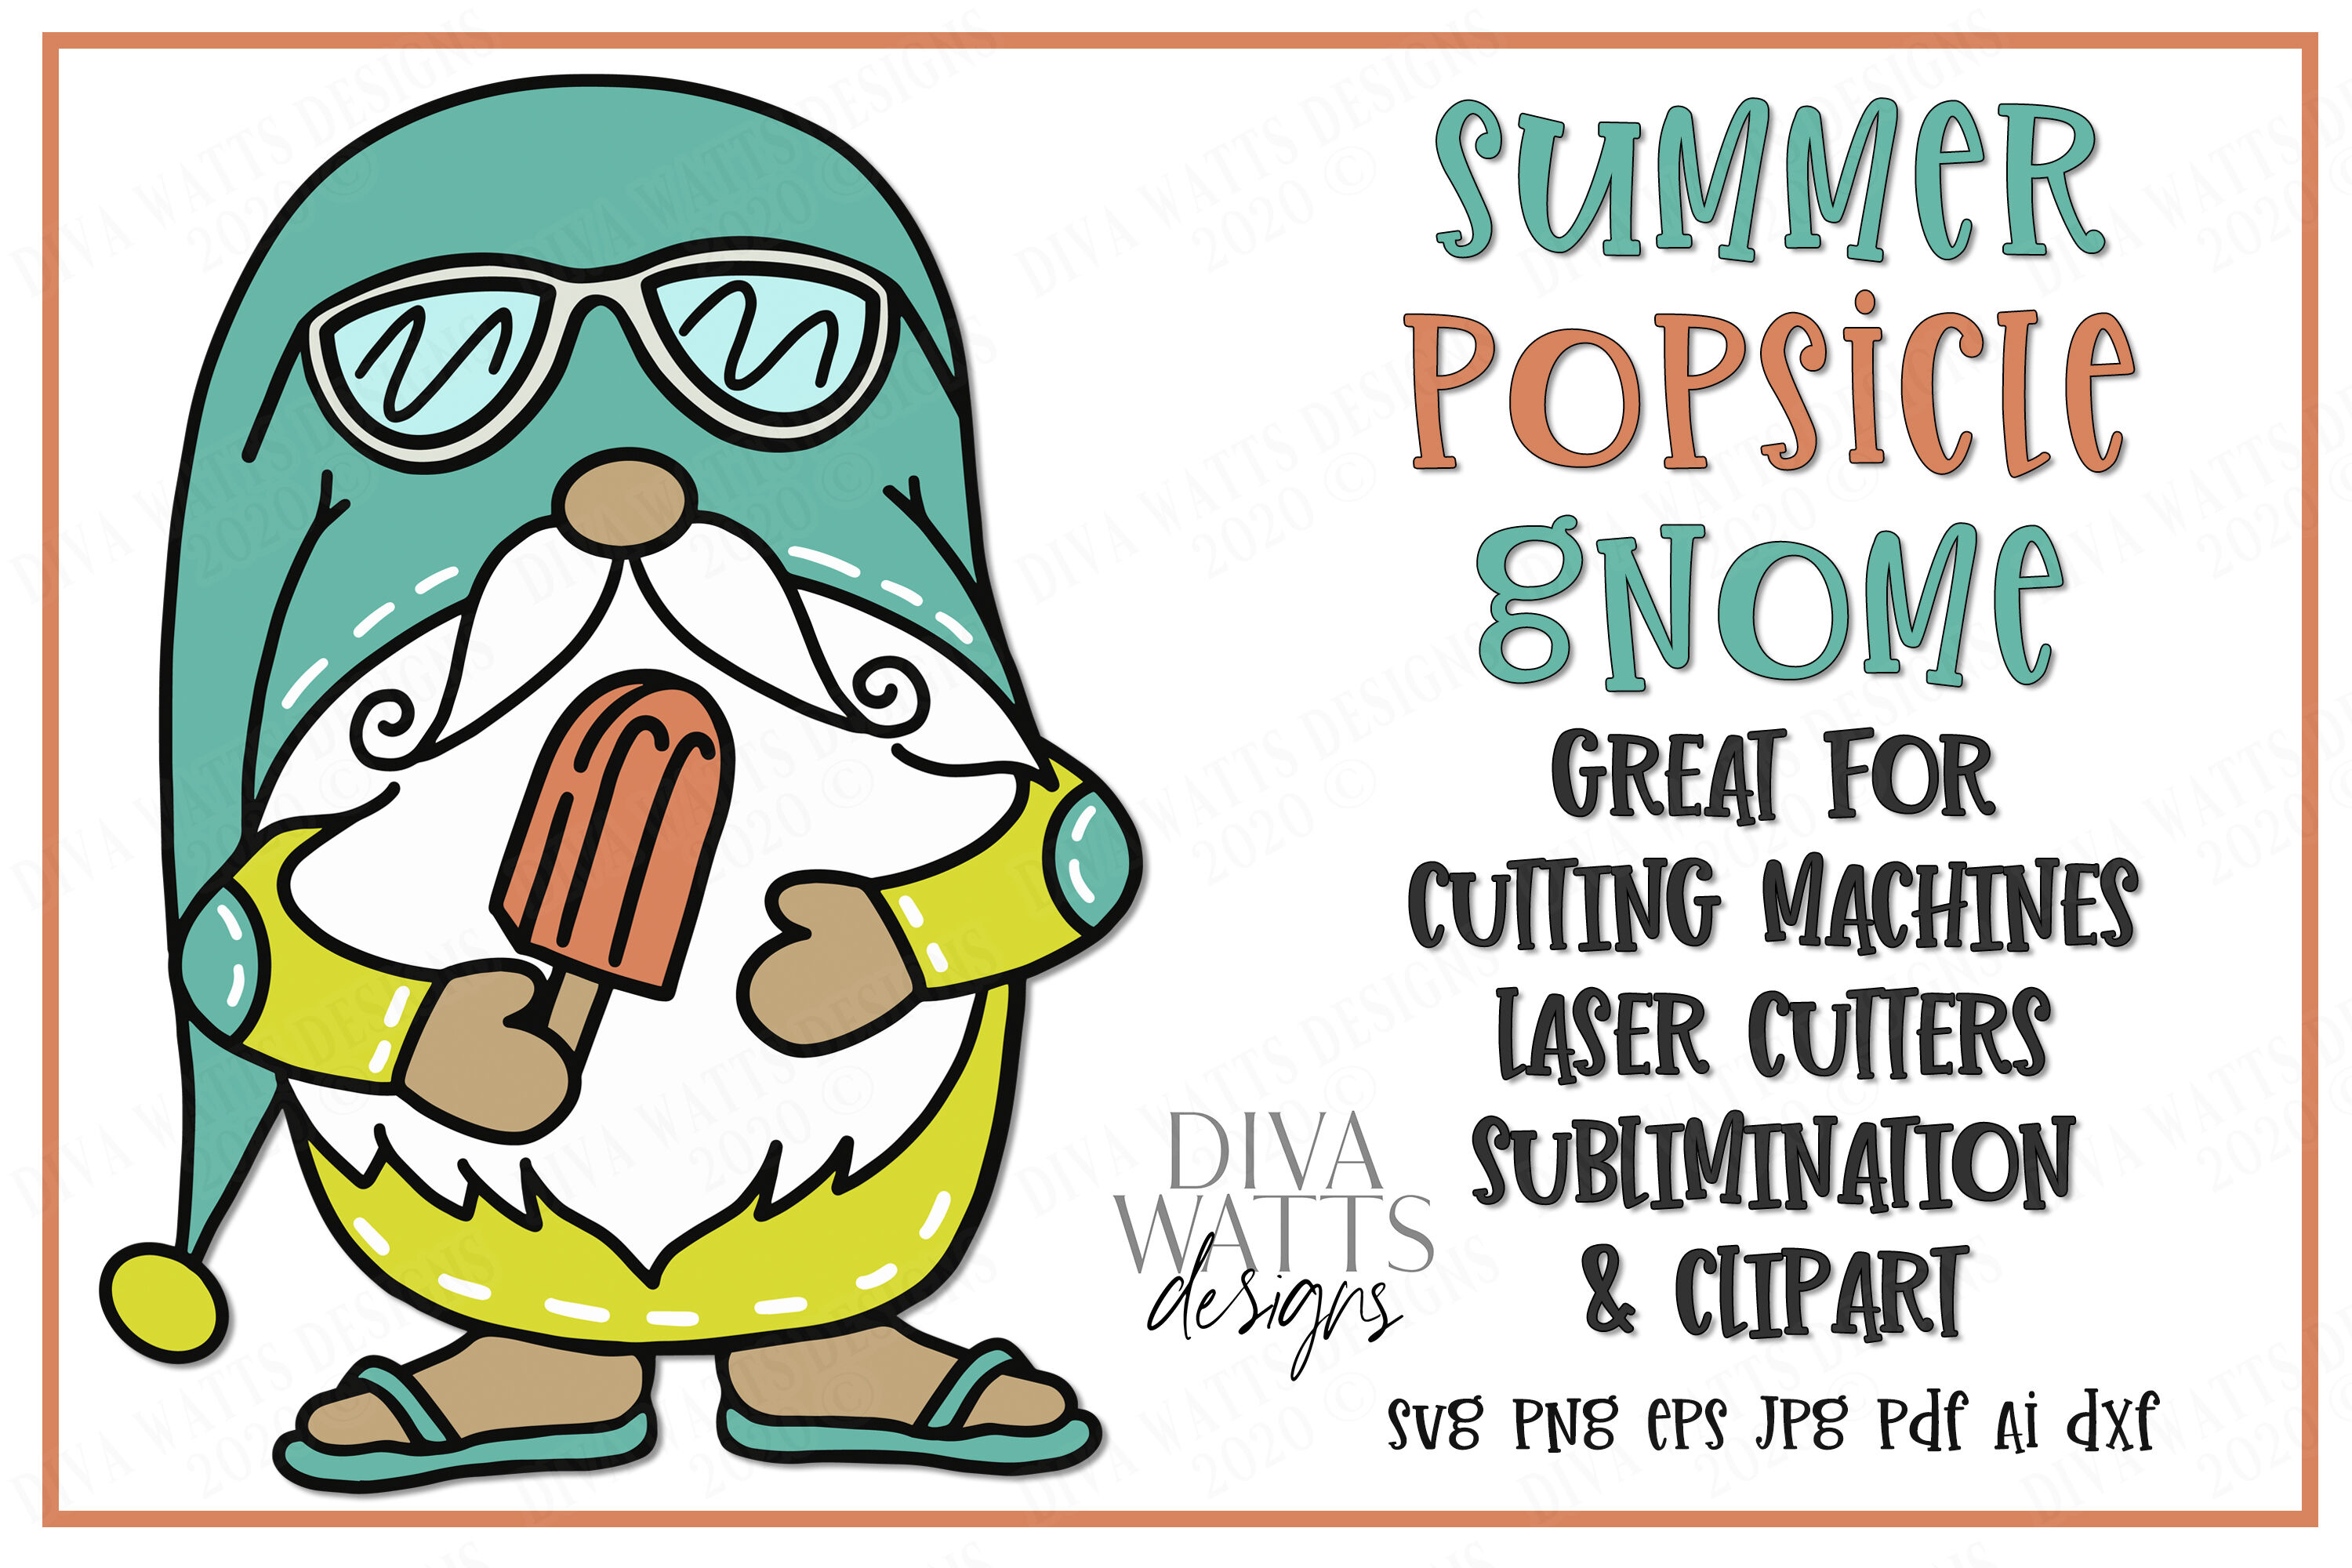 Summer Popsicle Gnome Cut File Svg Dxf Eps By Diva Watts Designs Thehungryjpeg Com